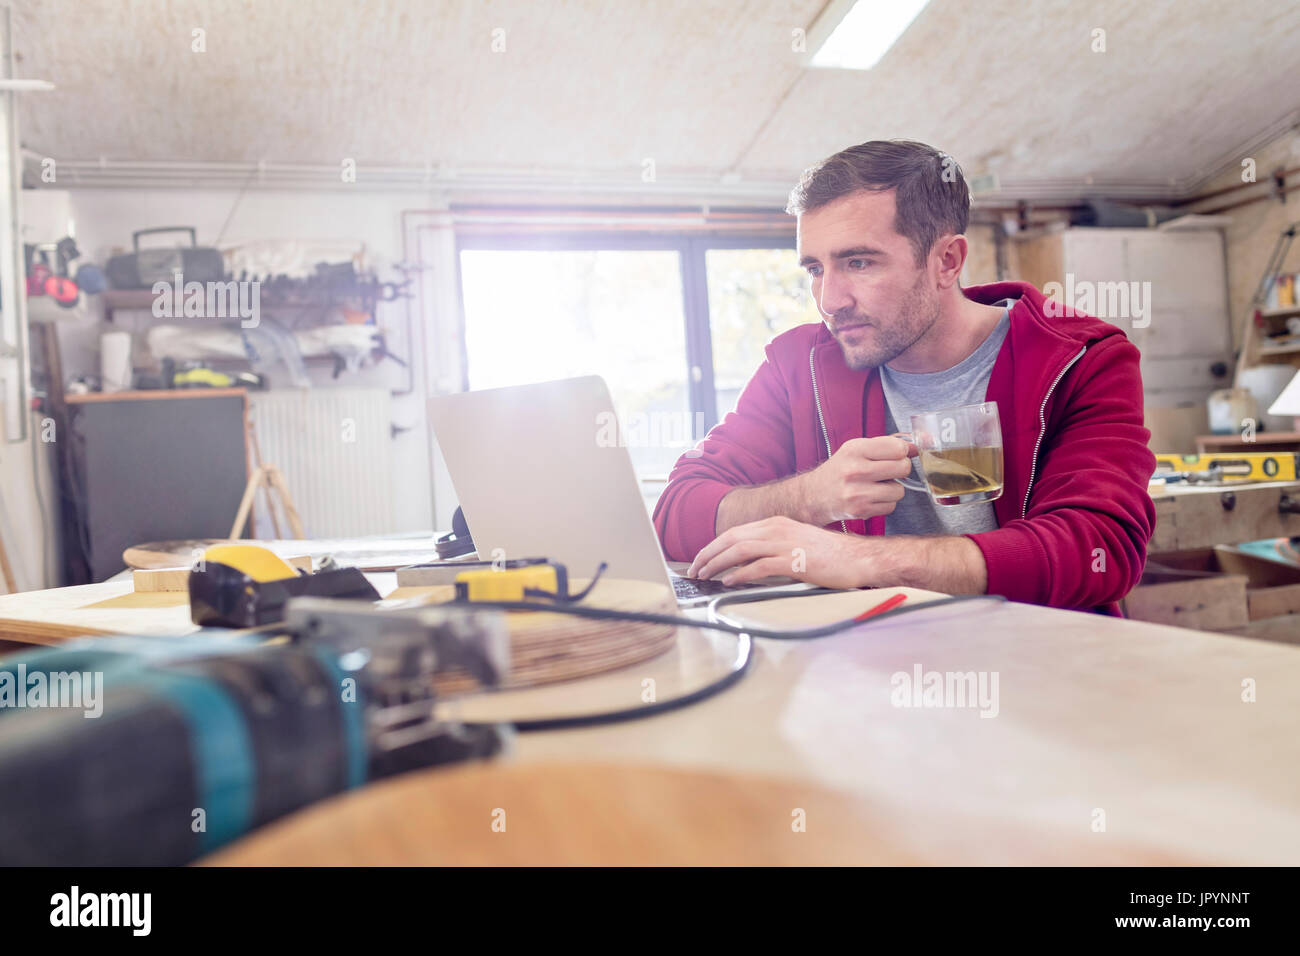 Male carpenter drinking tea and working at laptop on workbench in workshop Stock Photo